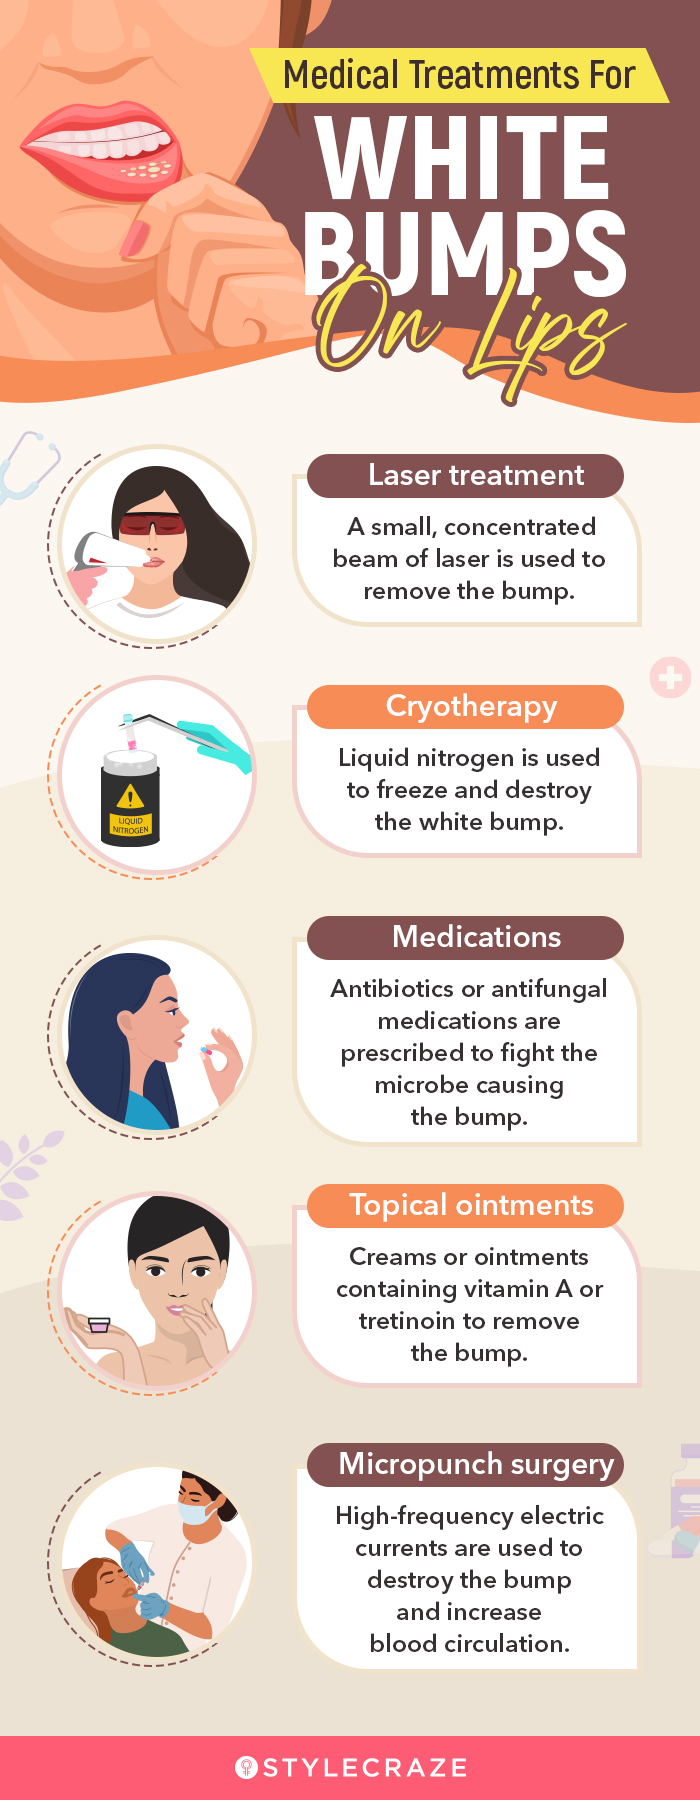 medical treatments for white bumps on lips (infographic)